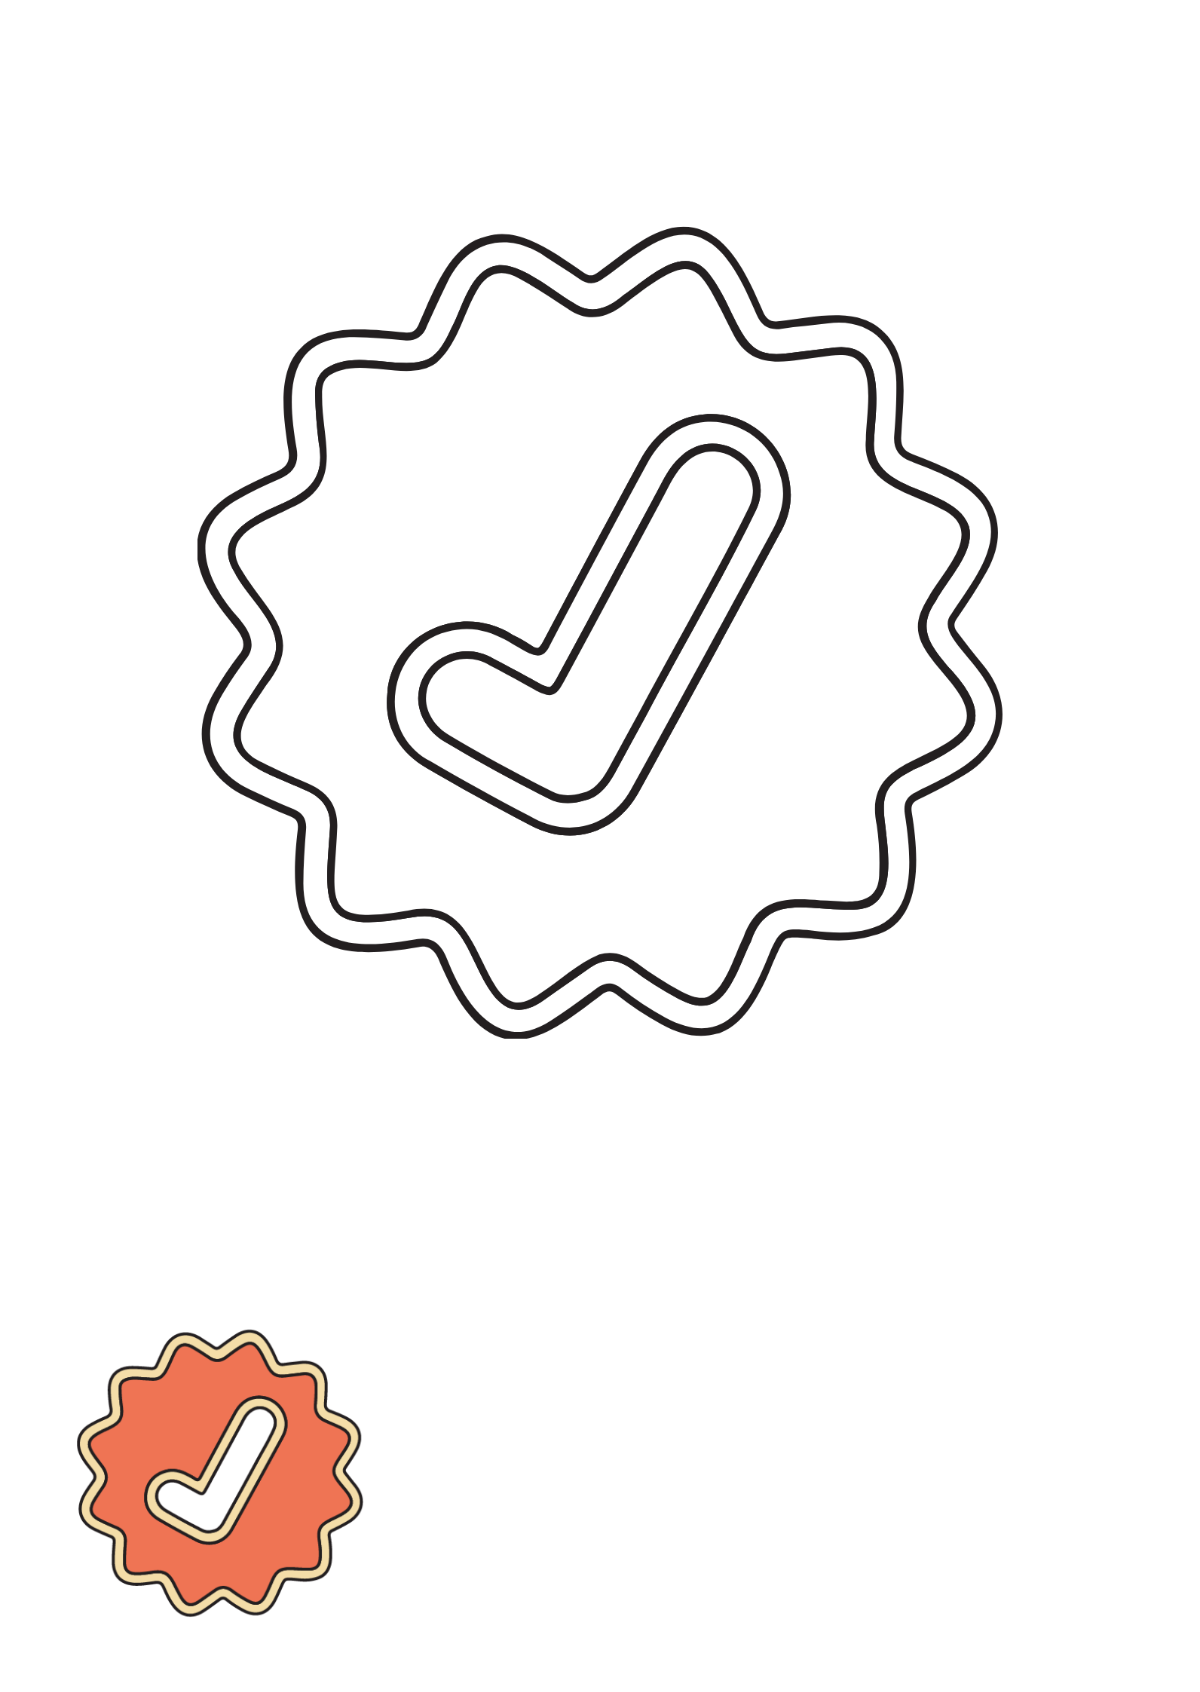 Verified Tick Mark coloring page Template